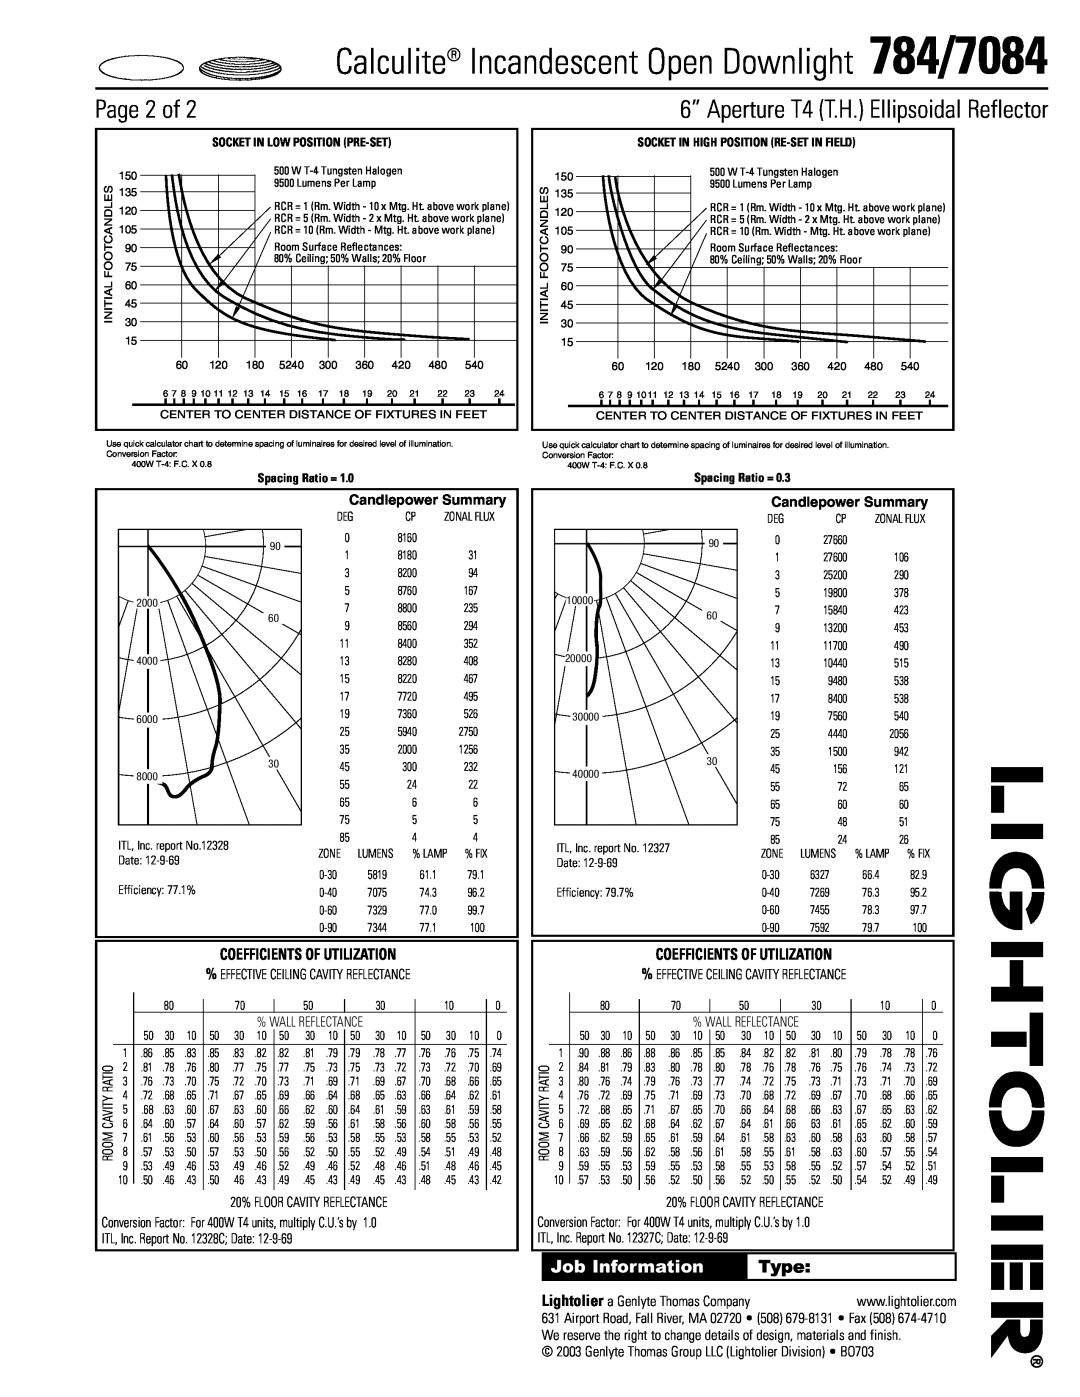 Lightolier Page 2 of, 6” Aperture T4 T.H. Ellipsoidal Reflector, Calculite Incandescent Open Downlight 784/7084, Type 